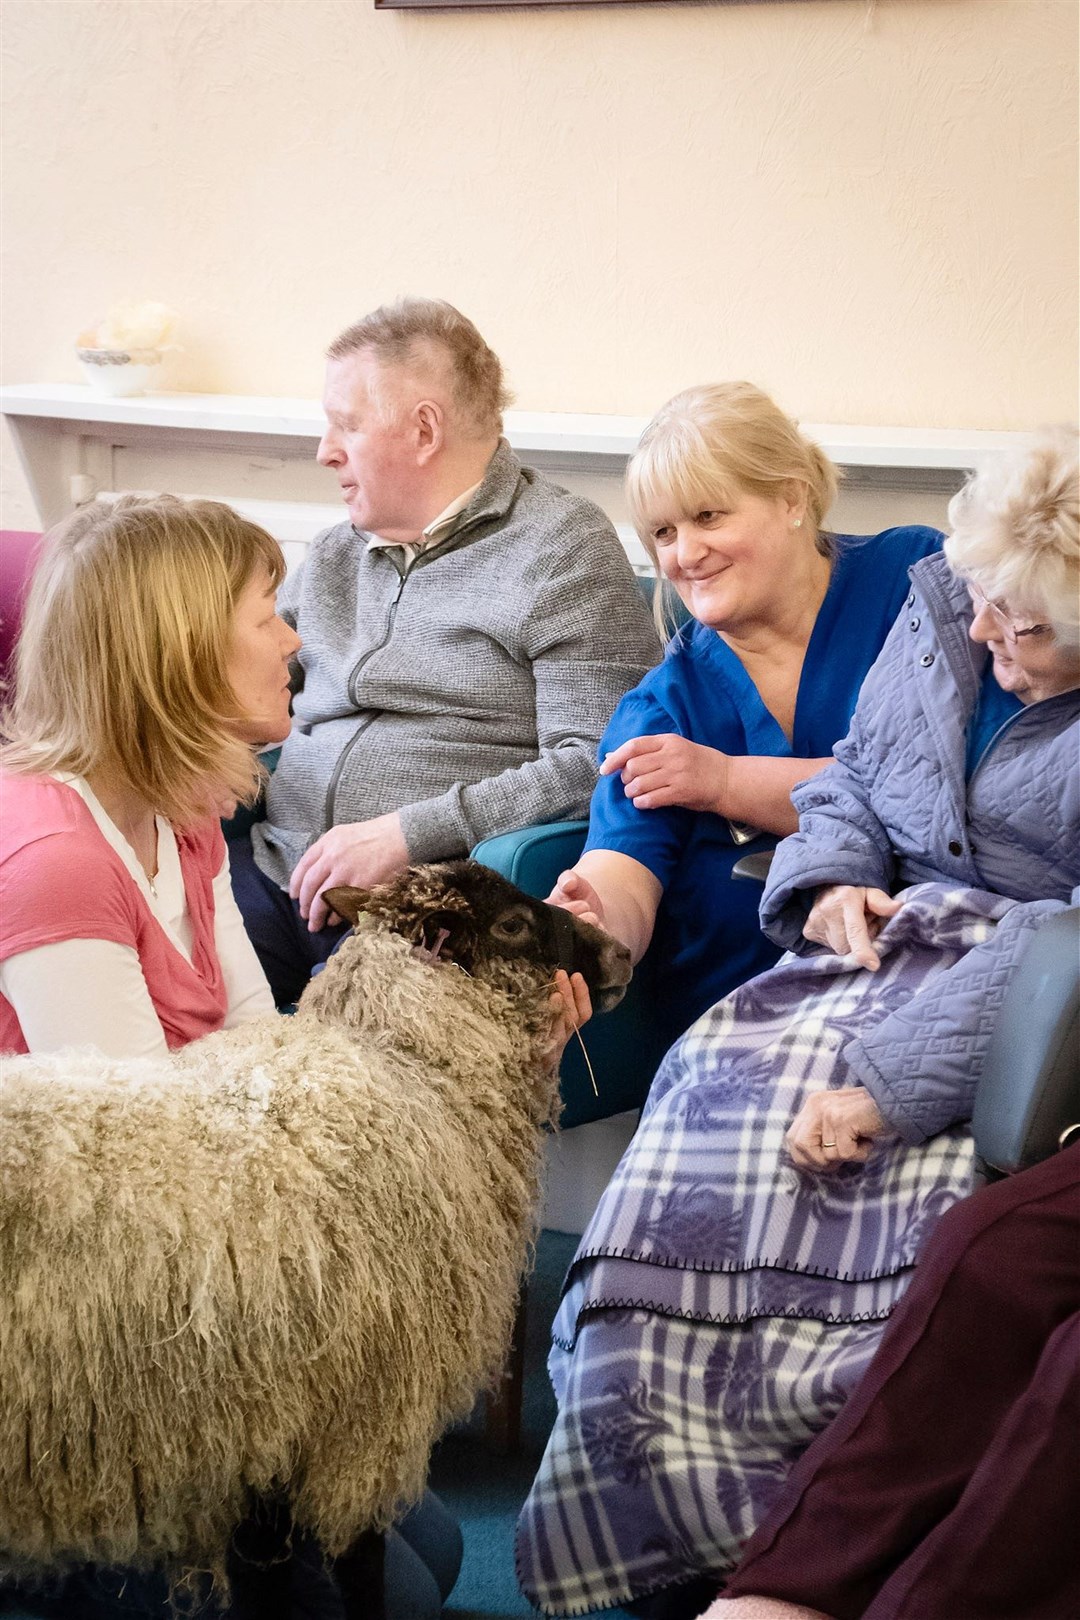 The unusual visitor brings joy to the Elgin care home.